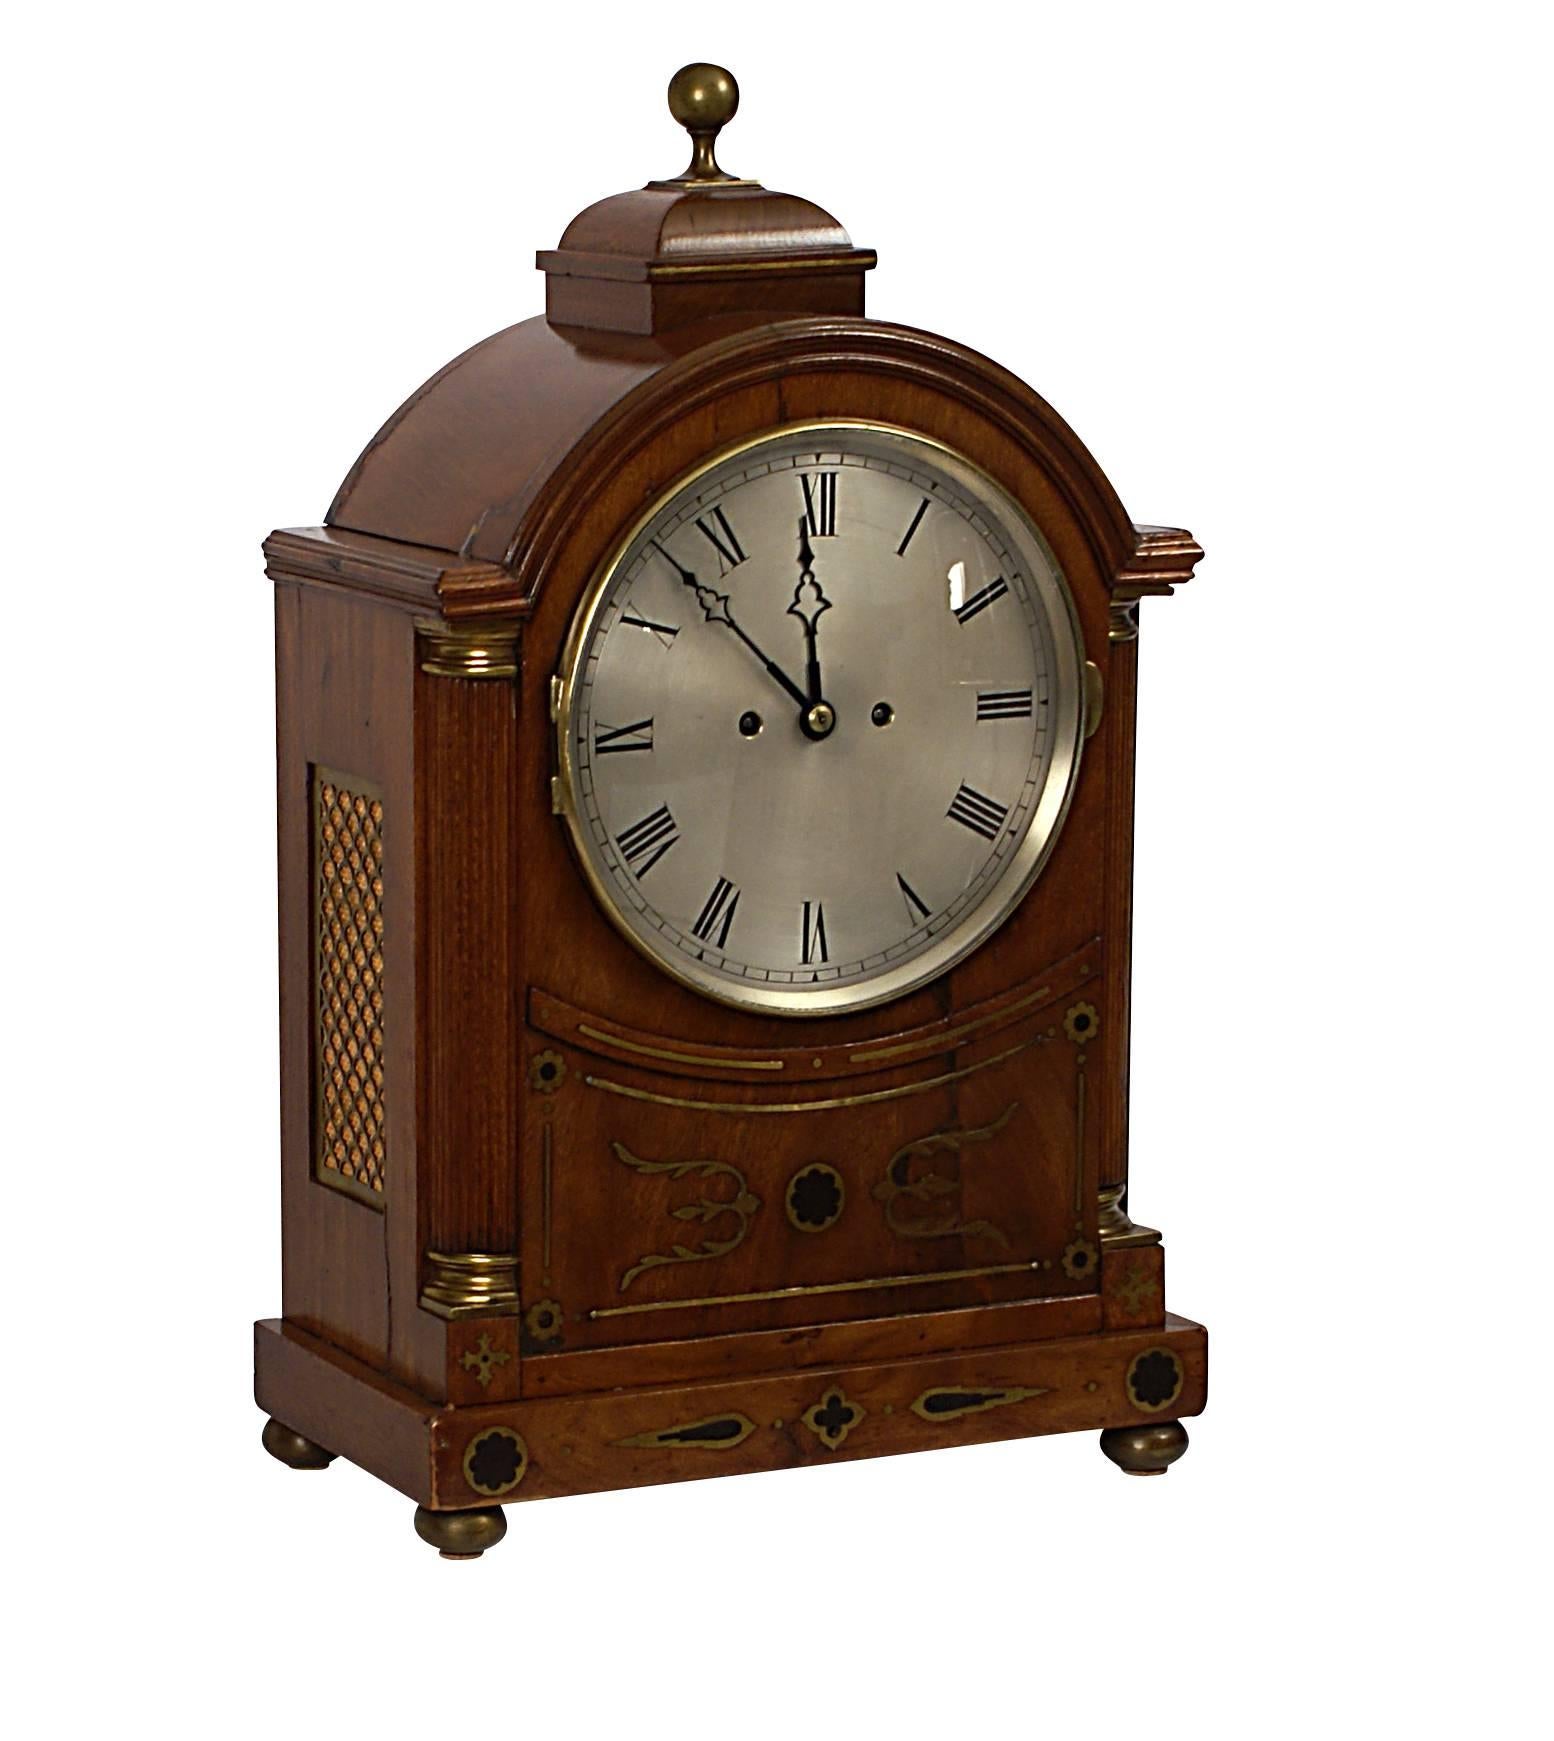 A handsome English Regency period mahogany bracket clock. Inlaid with brass and ebony. The arched dial framed by brass capped fluted columns. The inlays reference neoclassical and Gothic themes popular during this period. Made, circa 1820.